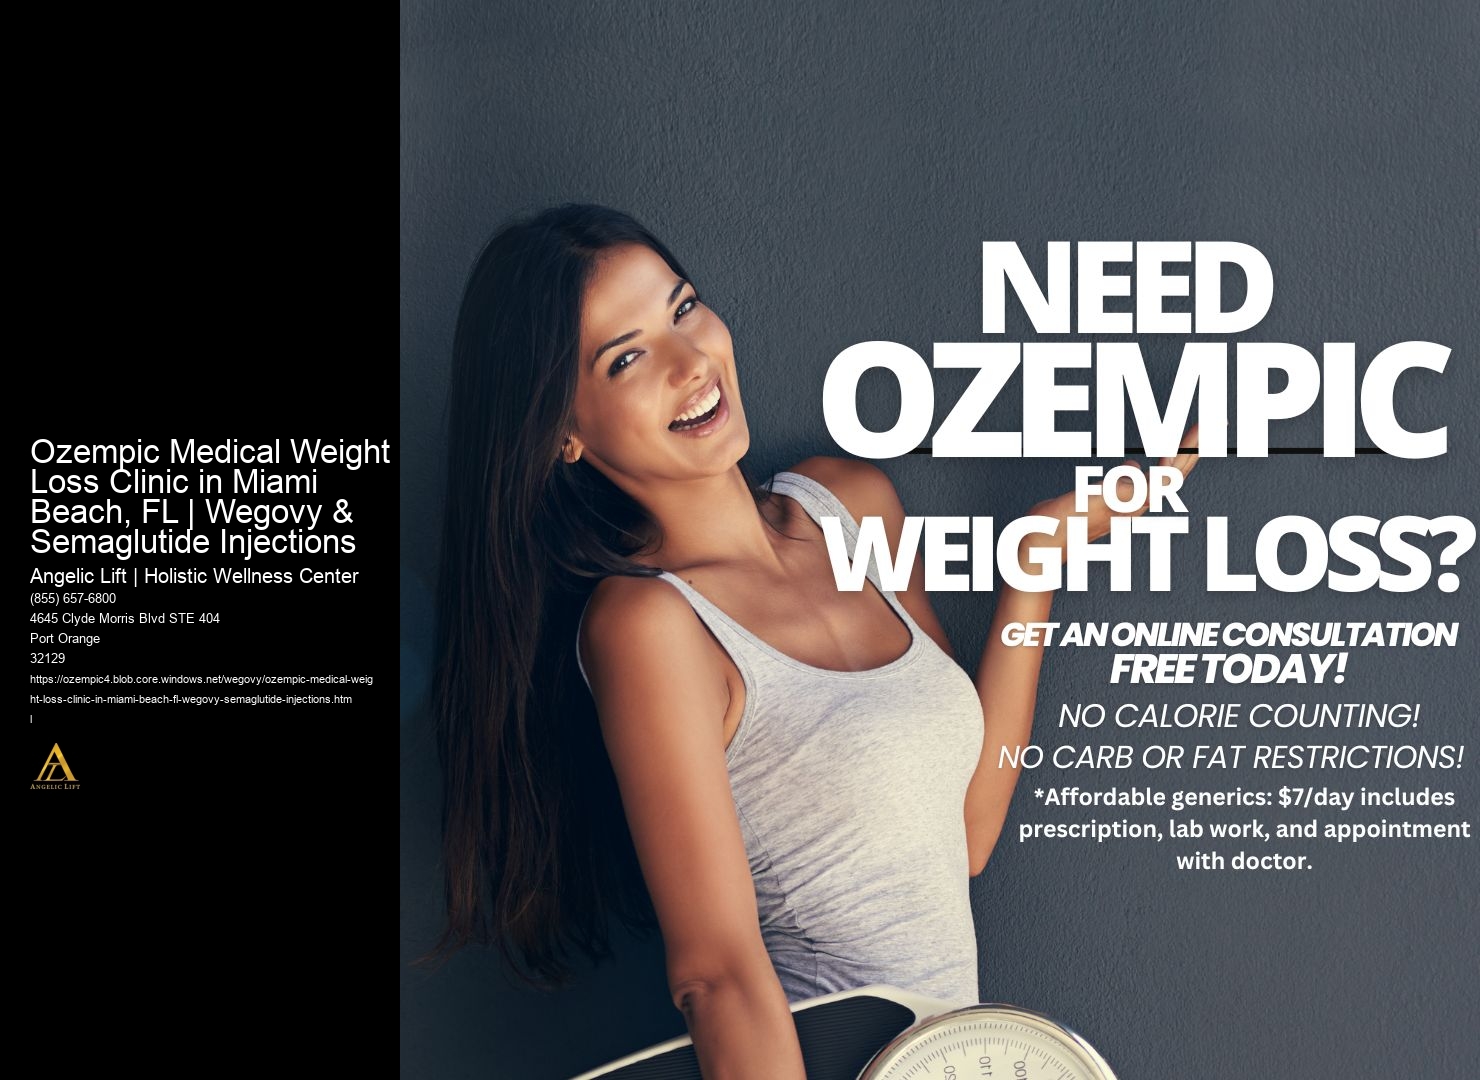 Ozempic Medical Weight Loss Clinic in Miami Beach, FL | Wegovy & Semaglutide Injections